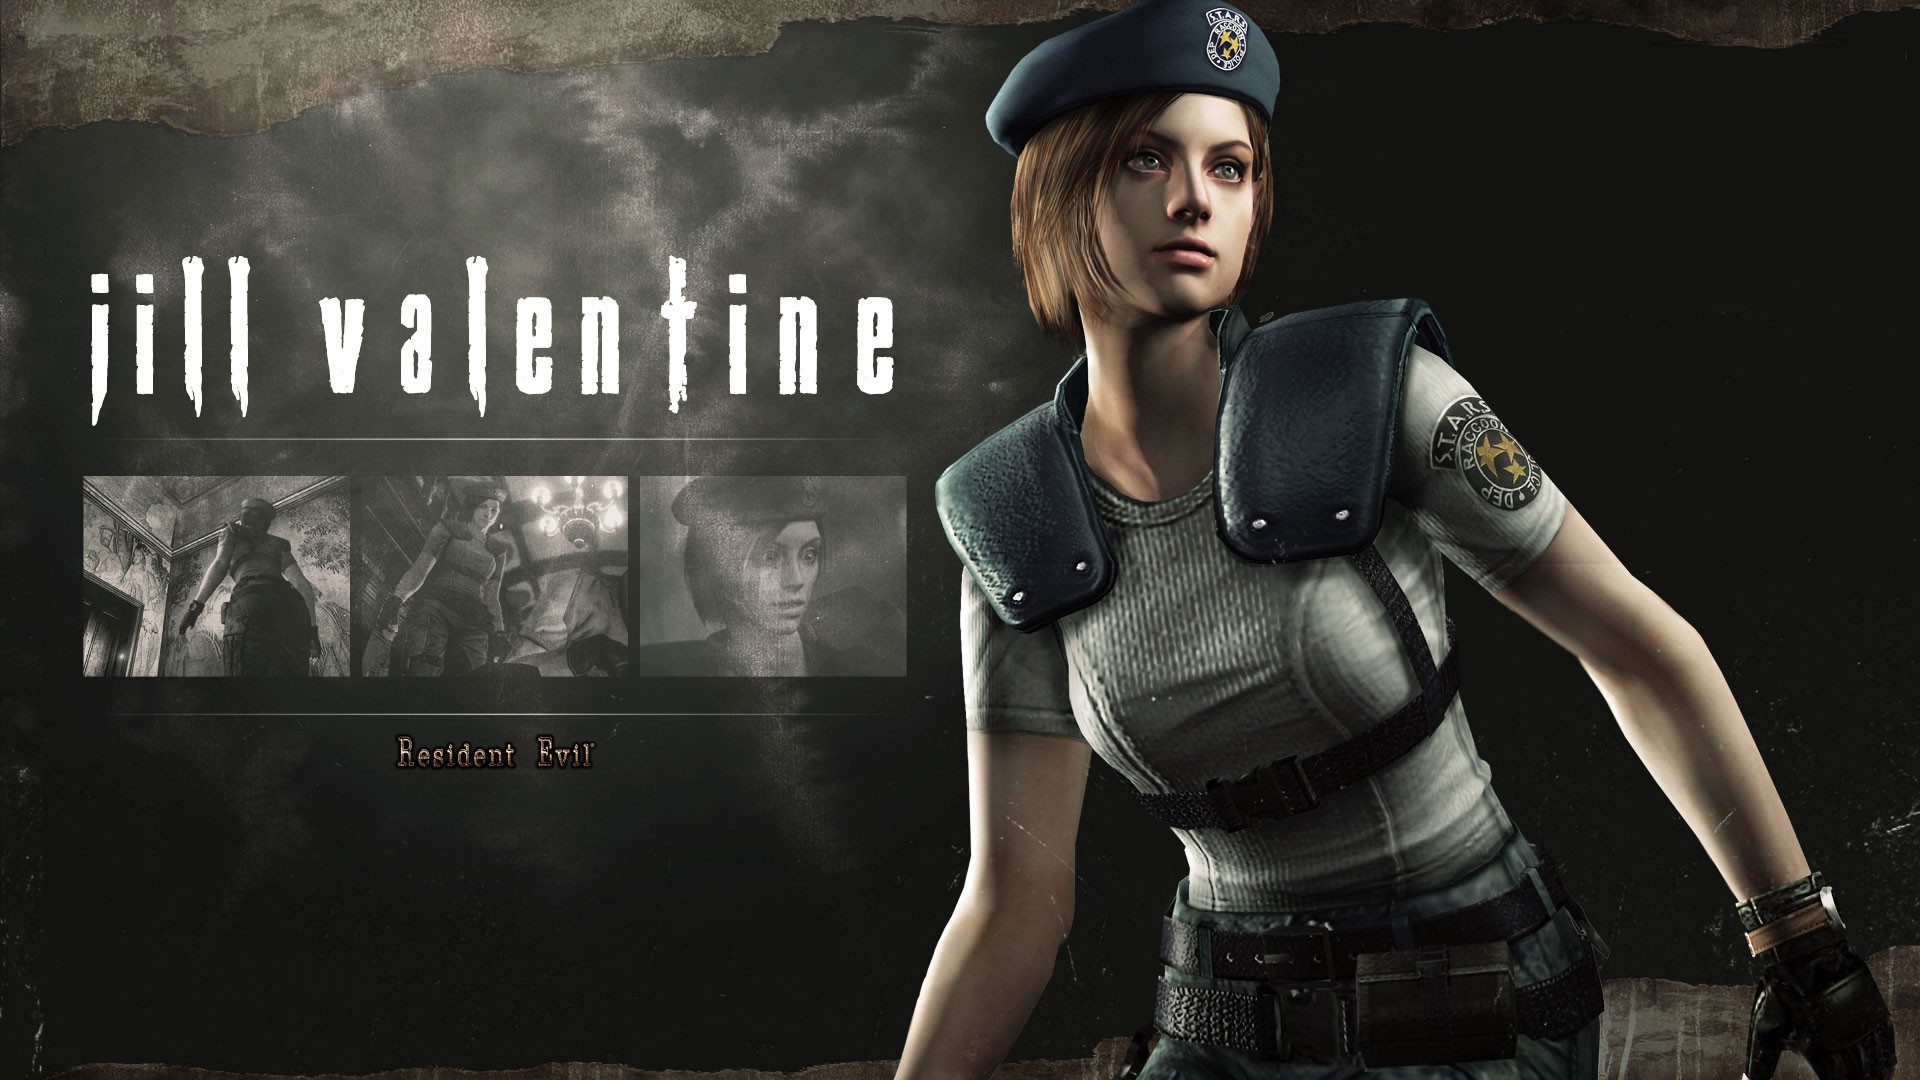 Jill Valentine From The Game Resident Evil HD Remaster Wallpaper And